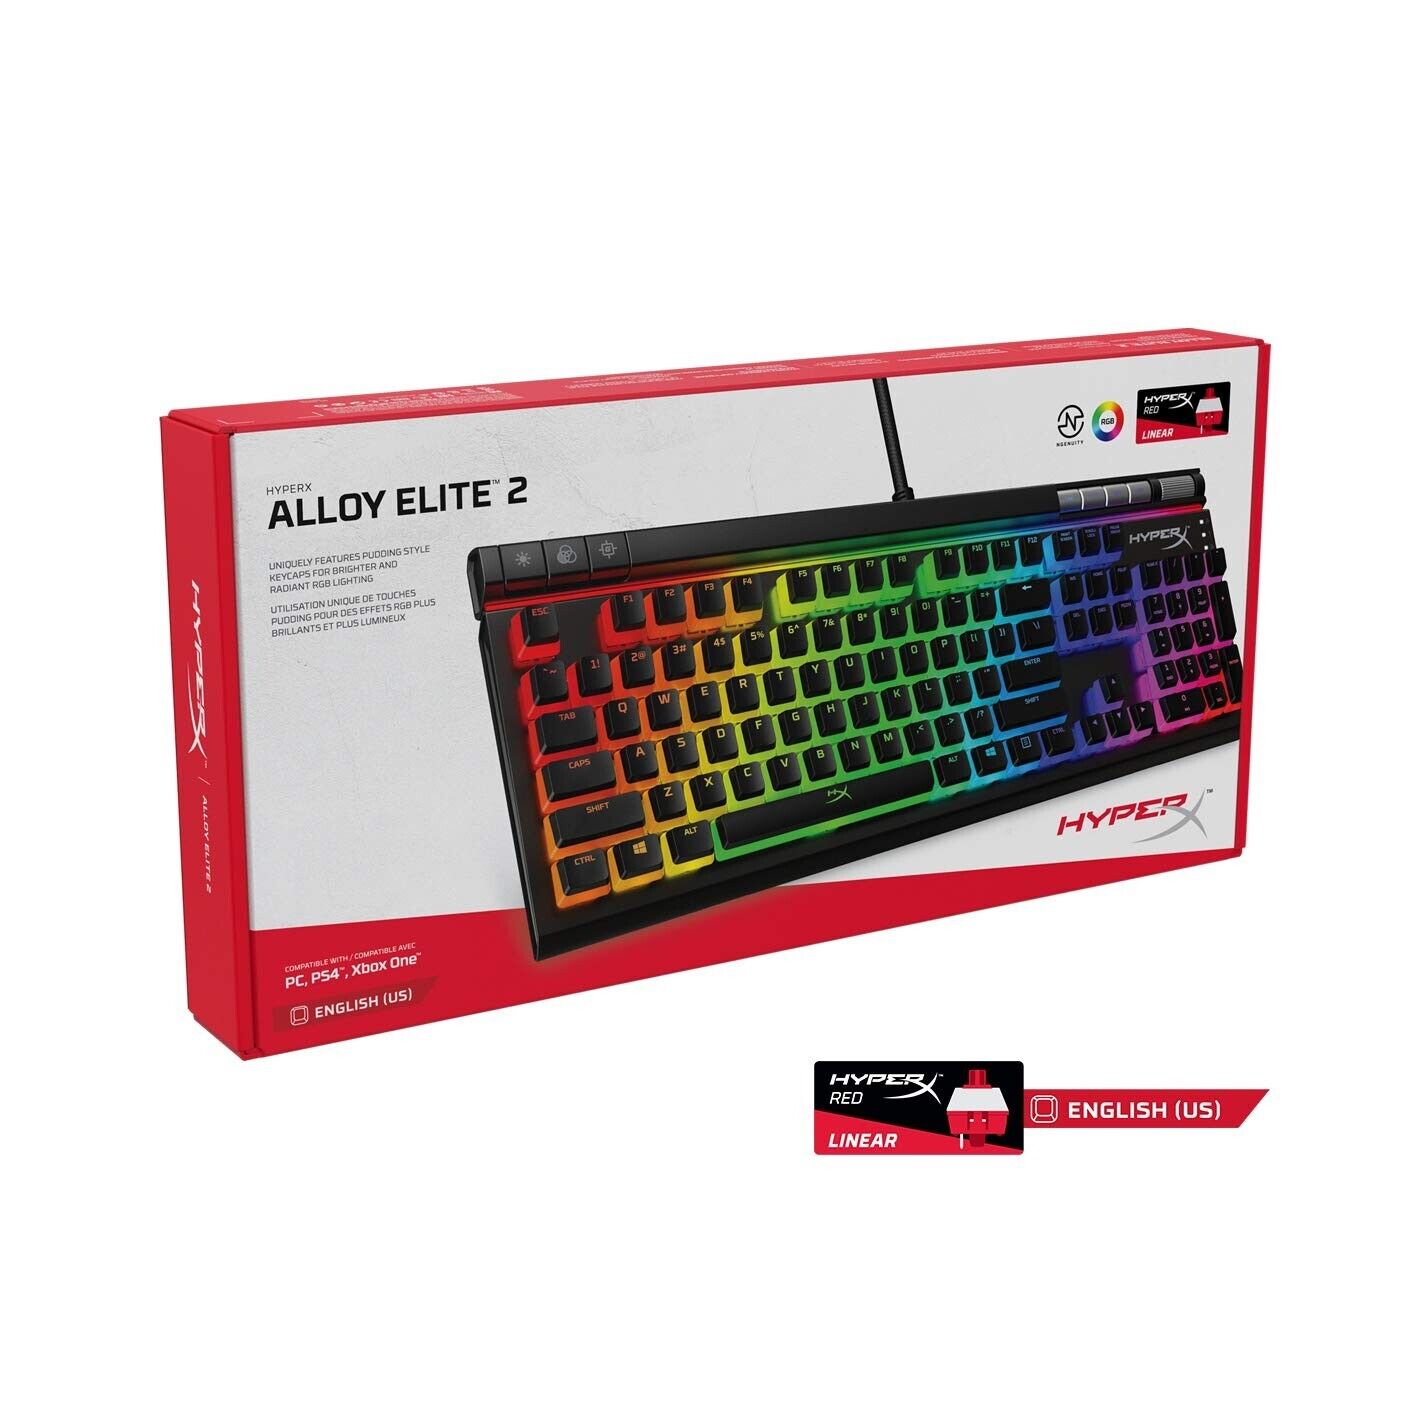 HyperX Alloy Elite 2 Mechanical Gaming Keyboard For PC. Brand New Sealed.